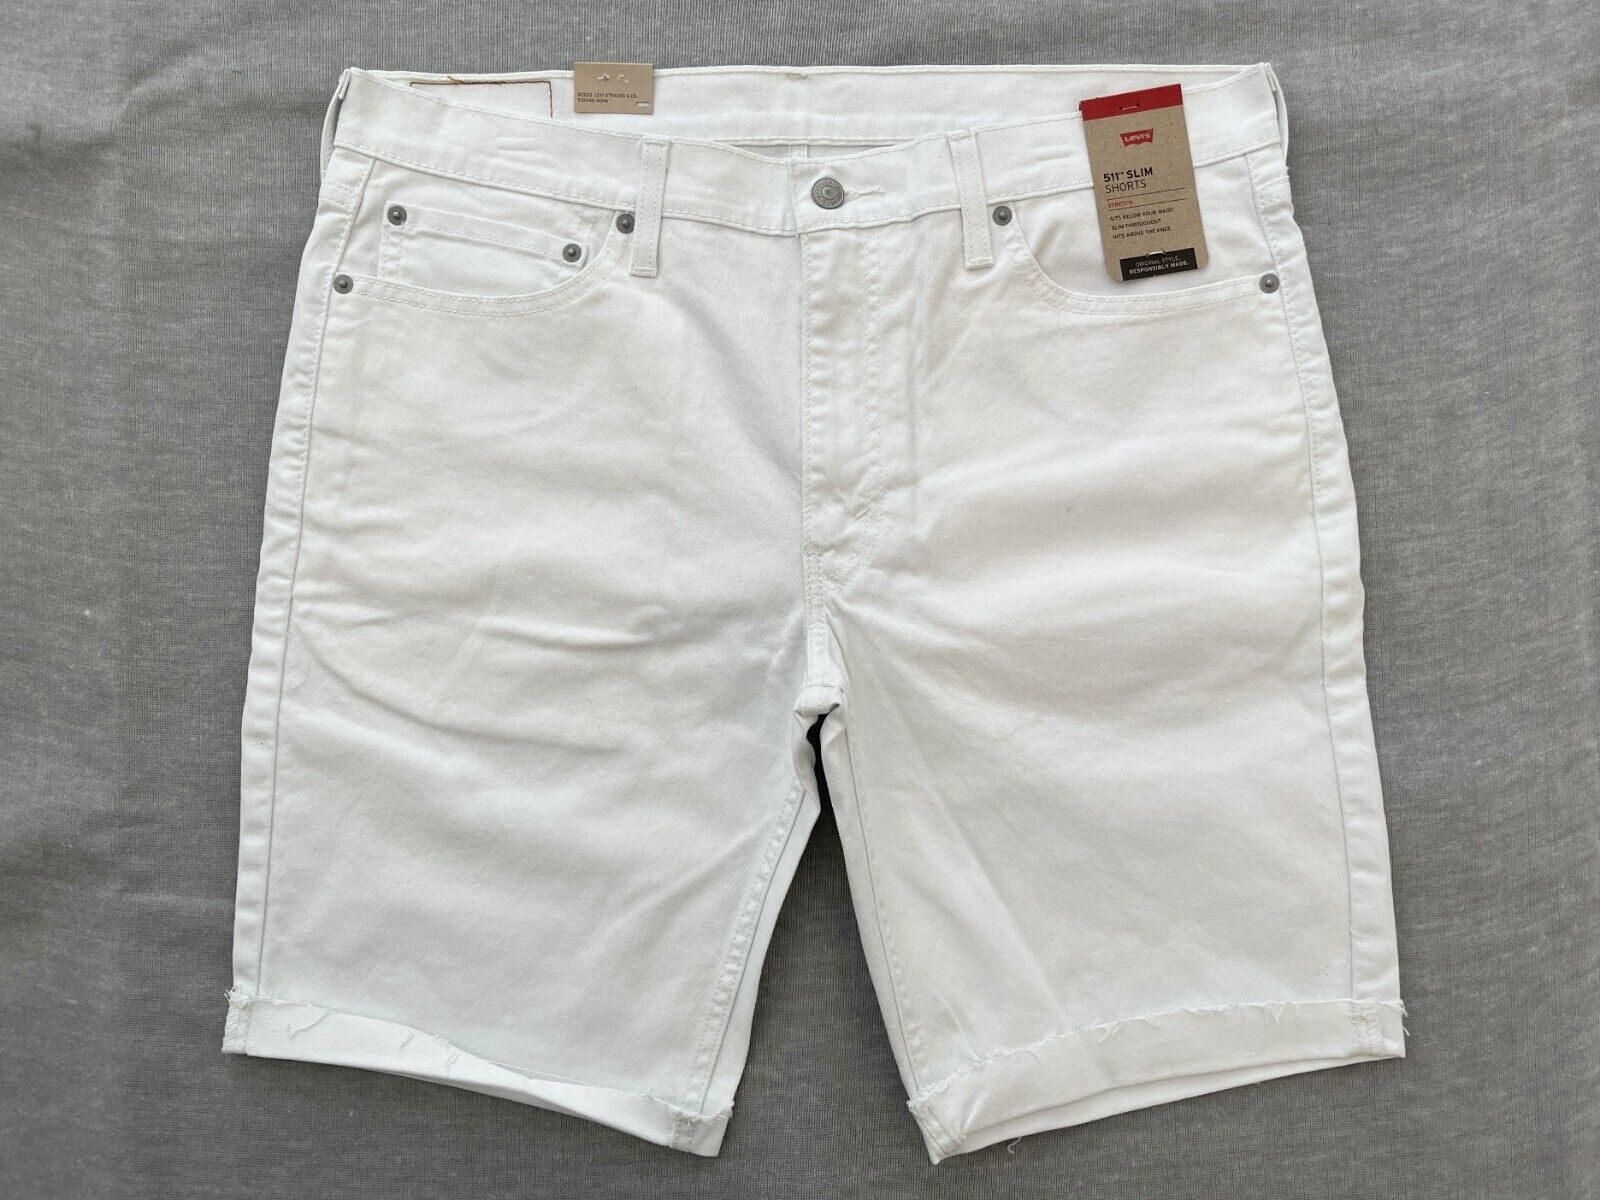 Primary image for Levis Red Tab 511 Mens White 11" Slim Fit Cut-Off Stretch Denim Jean Shorts